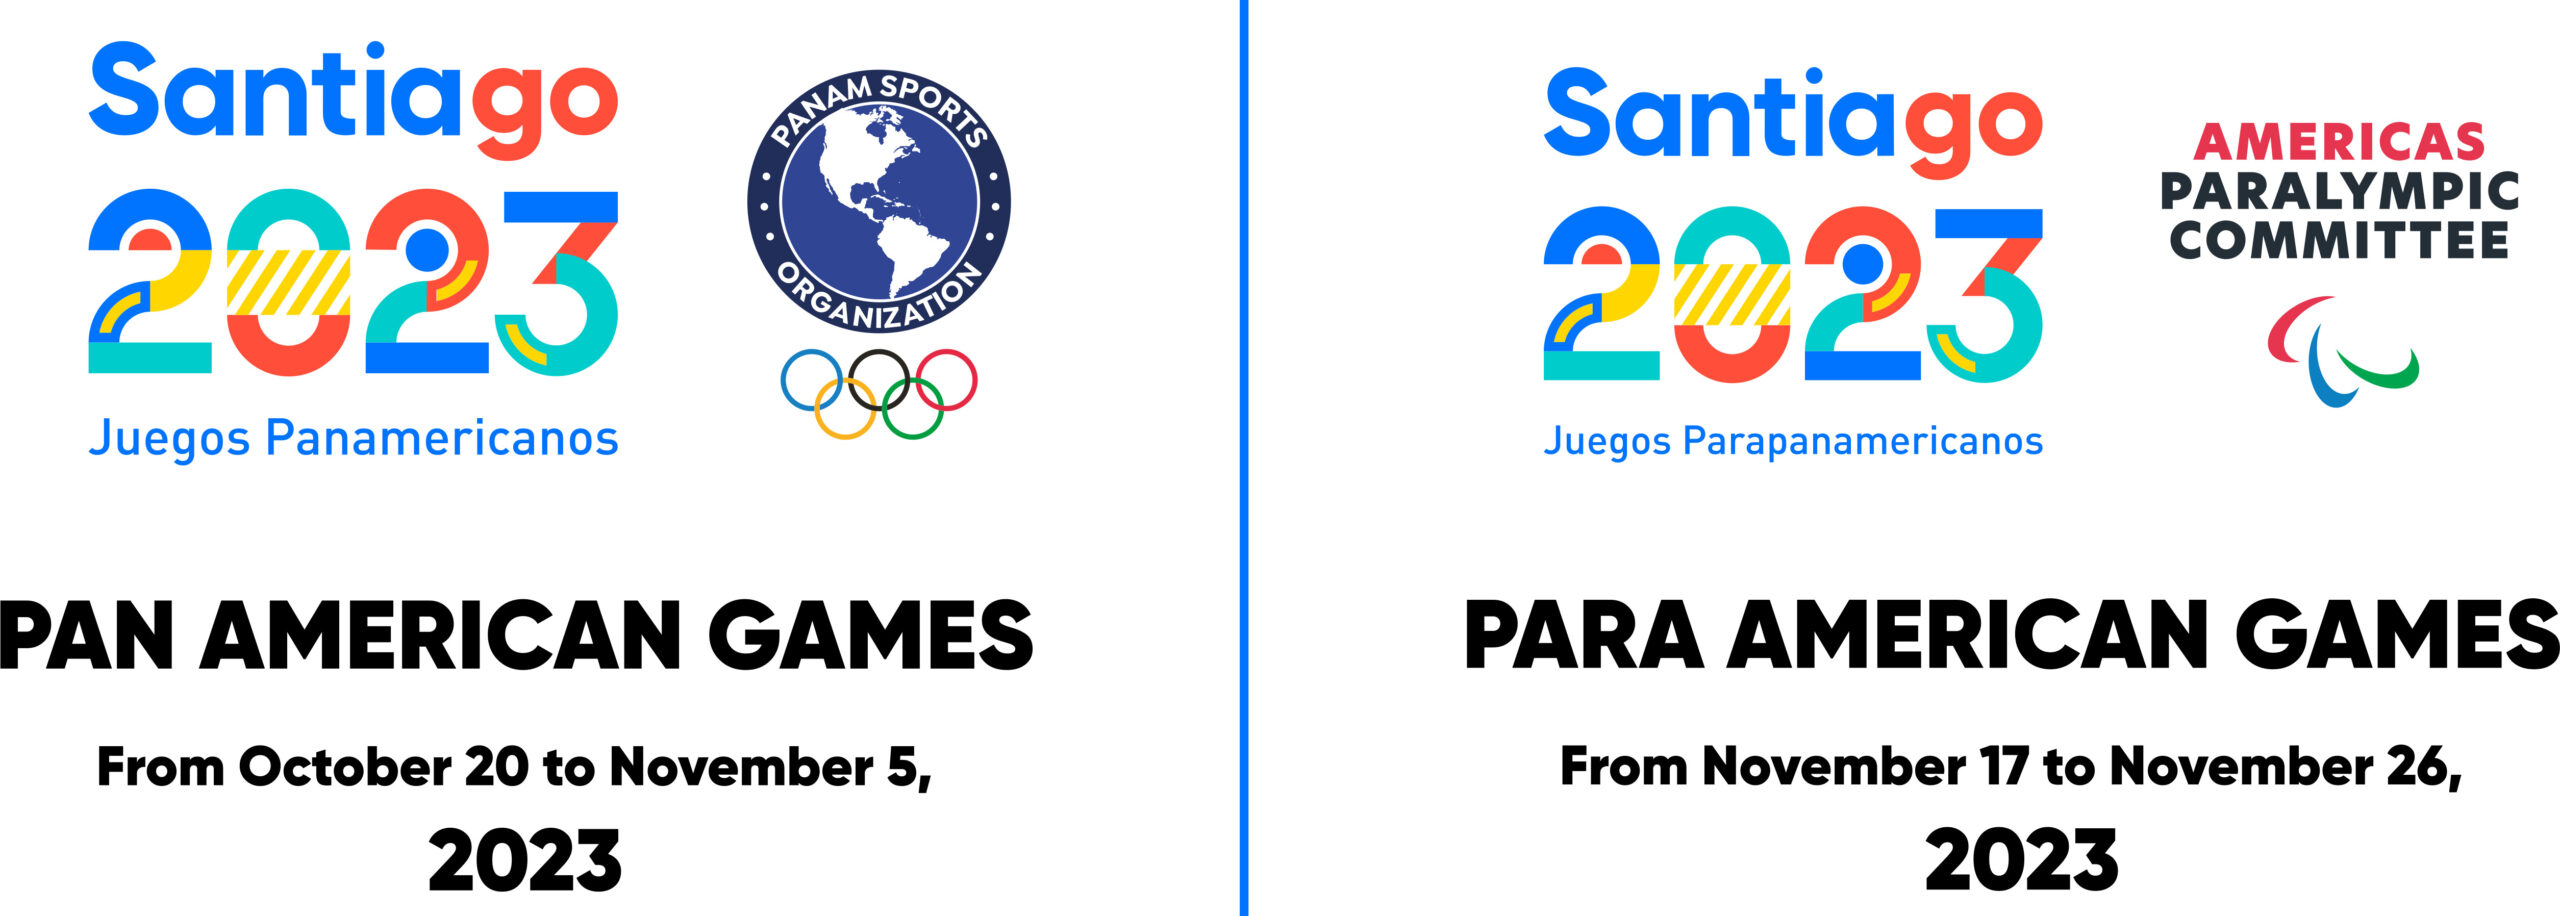 Santiago 2023 Names Van Wagner the Official Sport Presentation Producer of the Pan American and Parapan American Games featured image